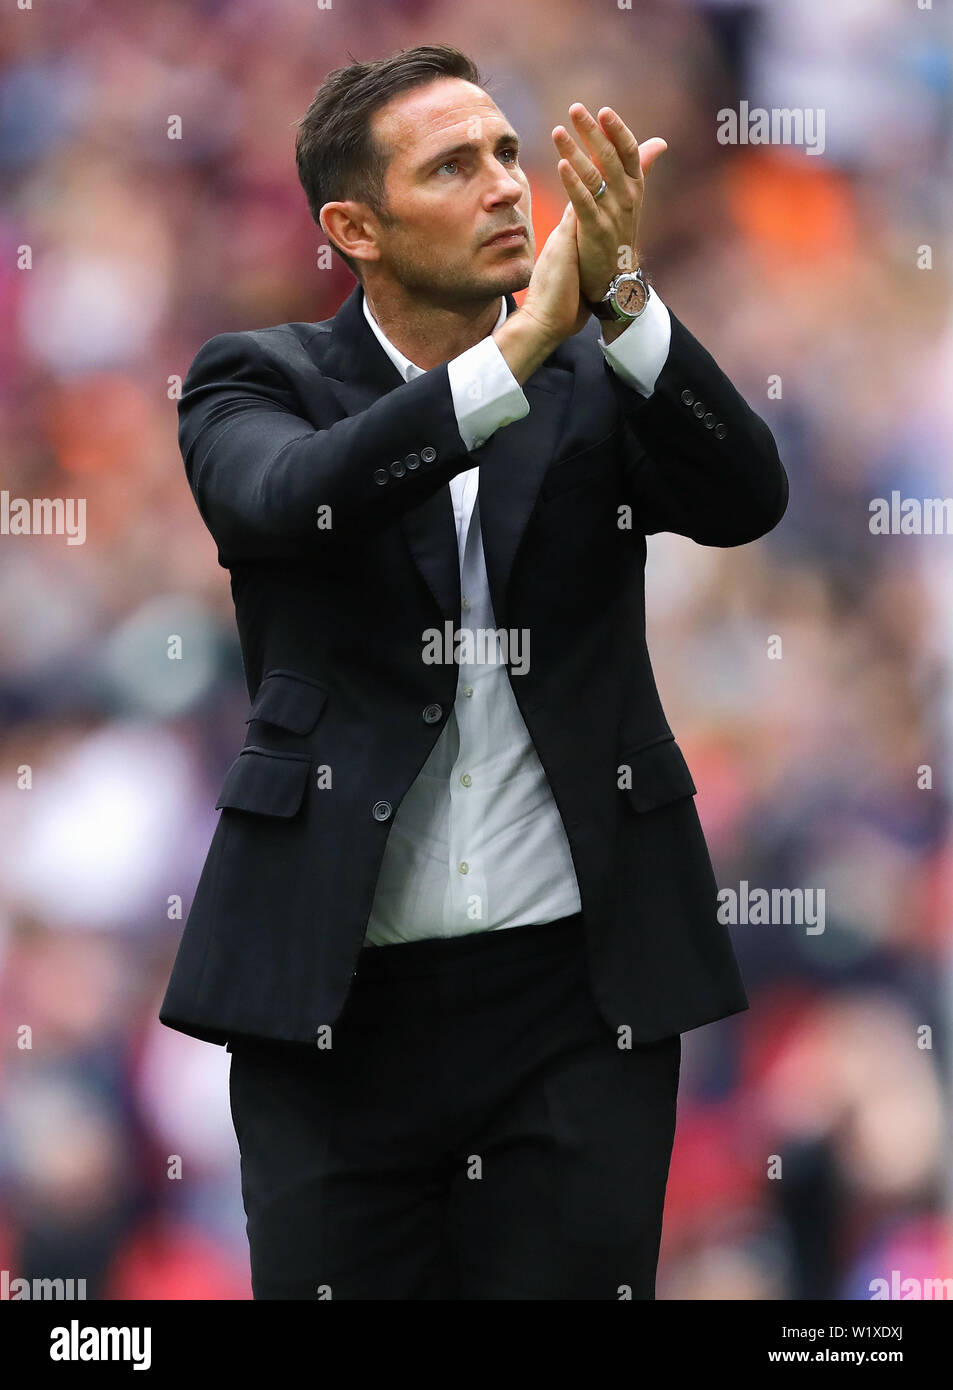 Manager of Derby County, Frank Lampard after defeat to Aston Villa - Aston Villa v Derby County, Sky Bet Championship Play-Off Final, Wembley Stadium, London - 27th May 2019  Editorial Use Only - DataCo restrictions apply Stock Photo